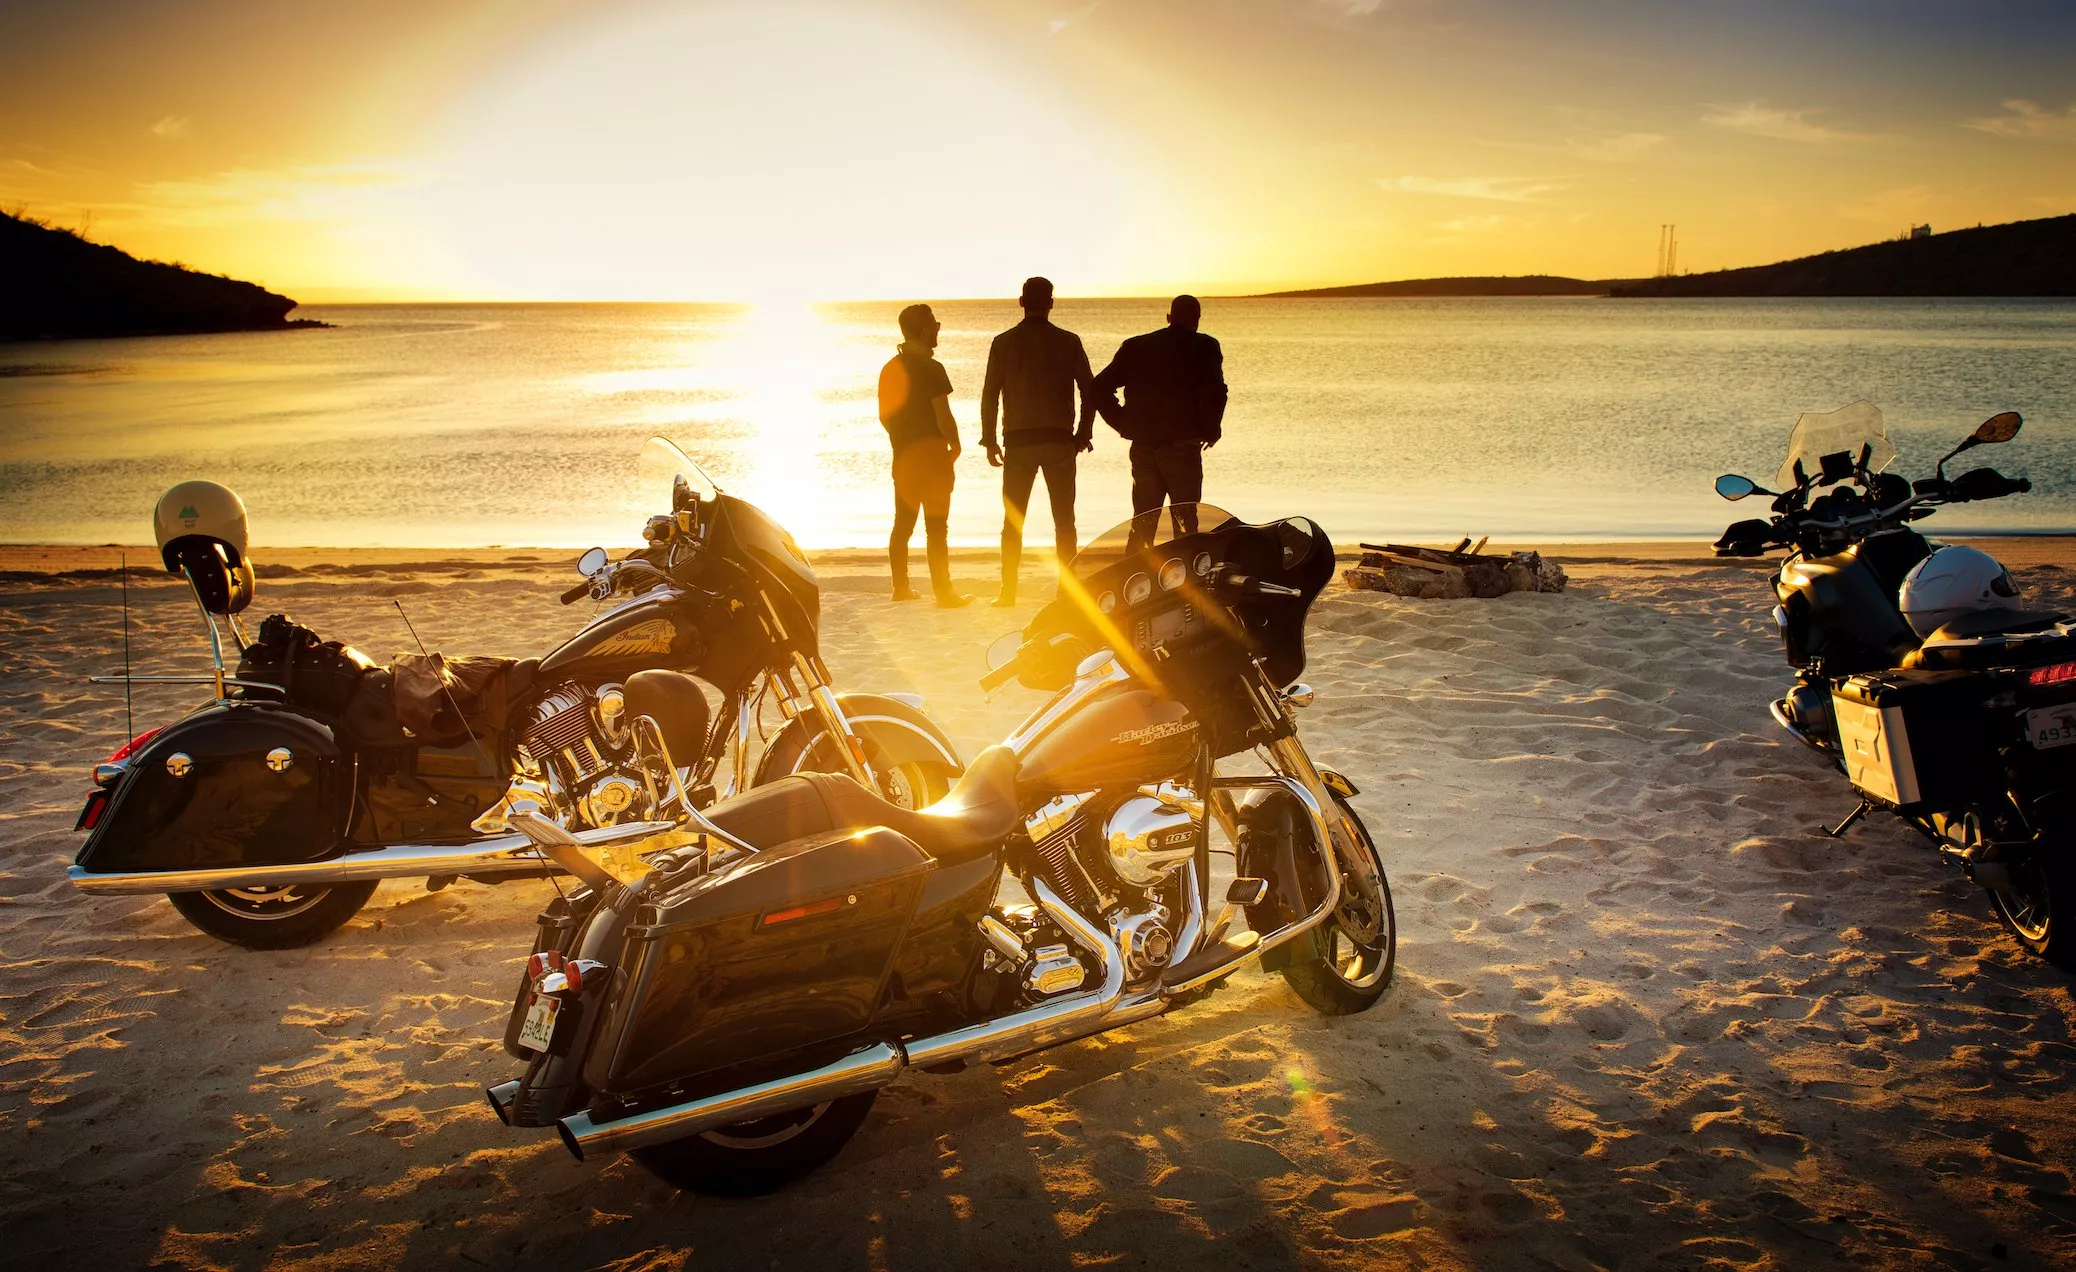 EagleRider Motorcycle Rentals and Tours Des Moines in USA, North America | Motorcycles - Rated 0.9